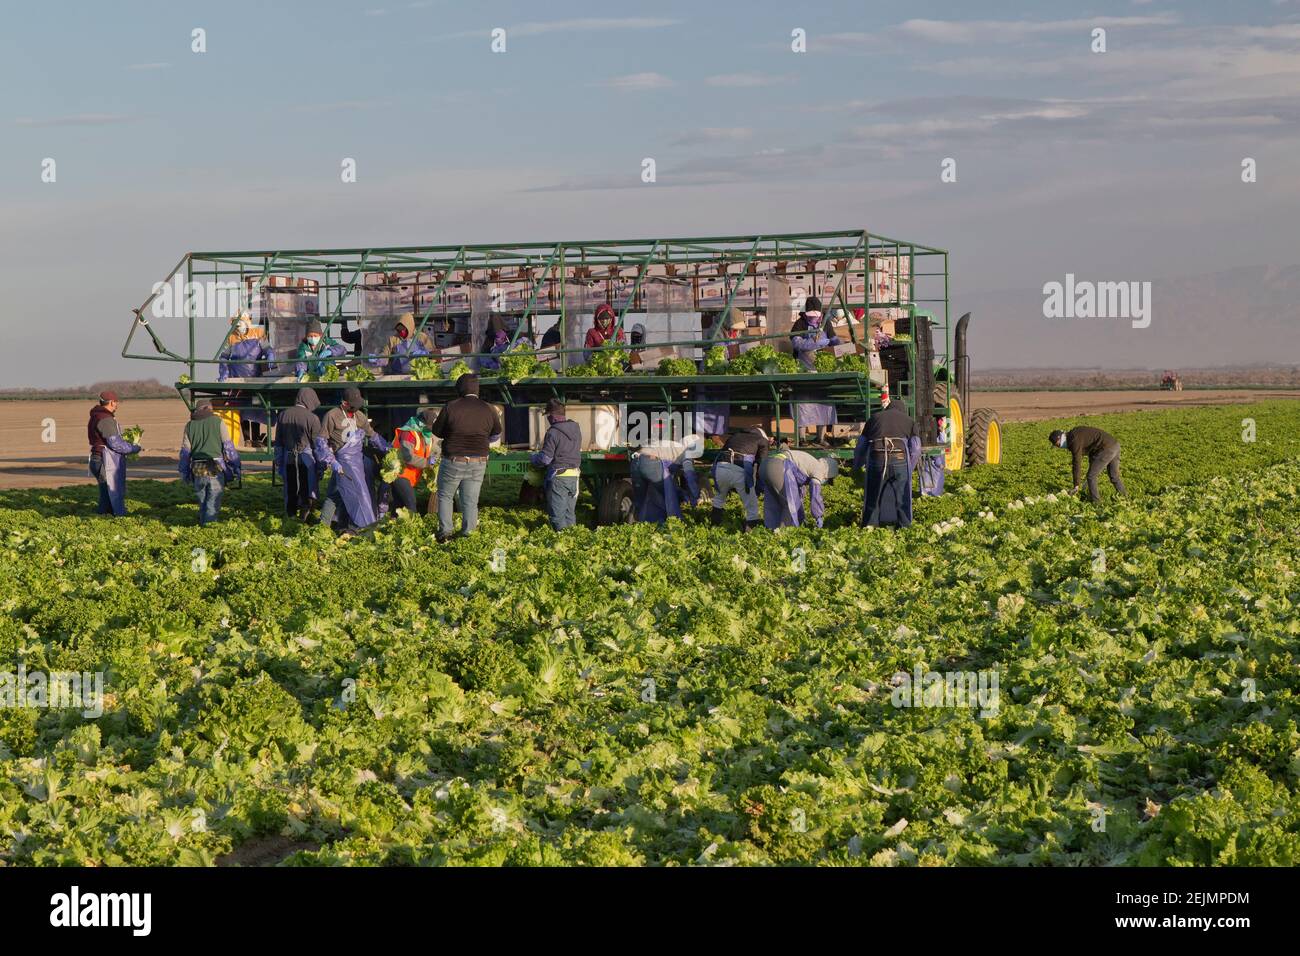 Organic Green Leaf Lettuce  'Lactuca sativa', hispanic farm workers harvesting, packing crop, early morning light. Stock Photo